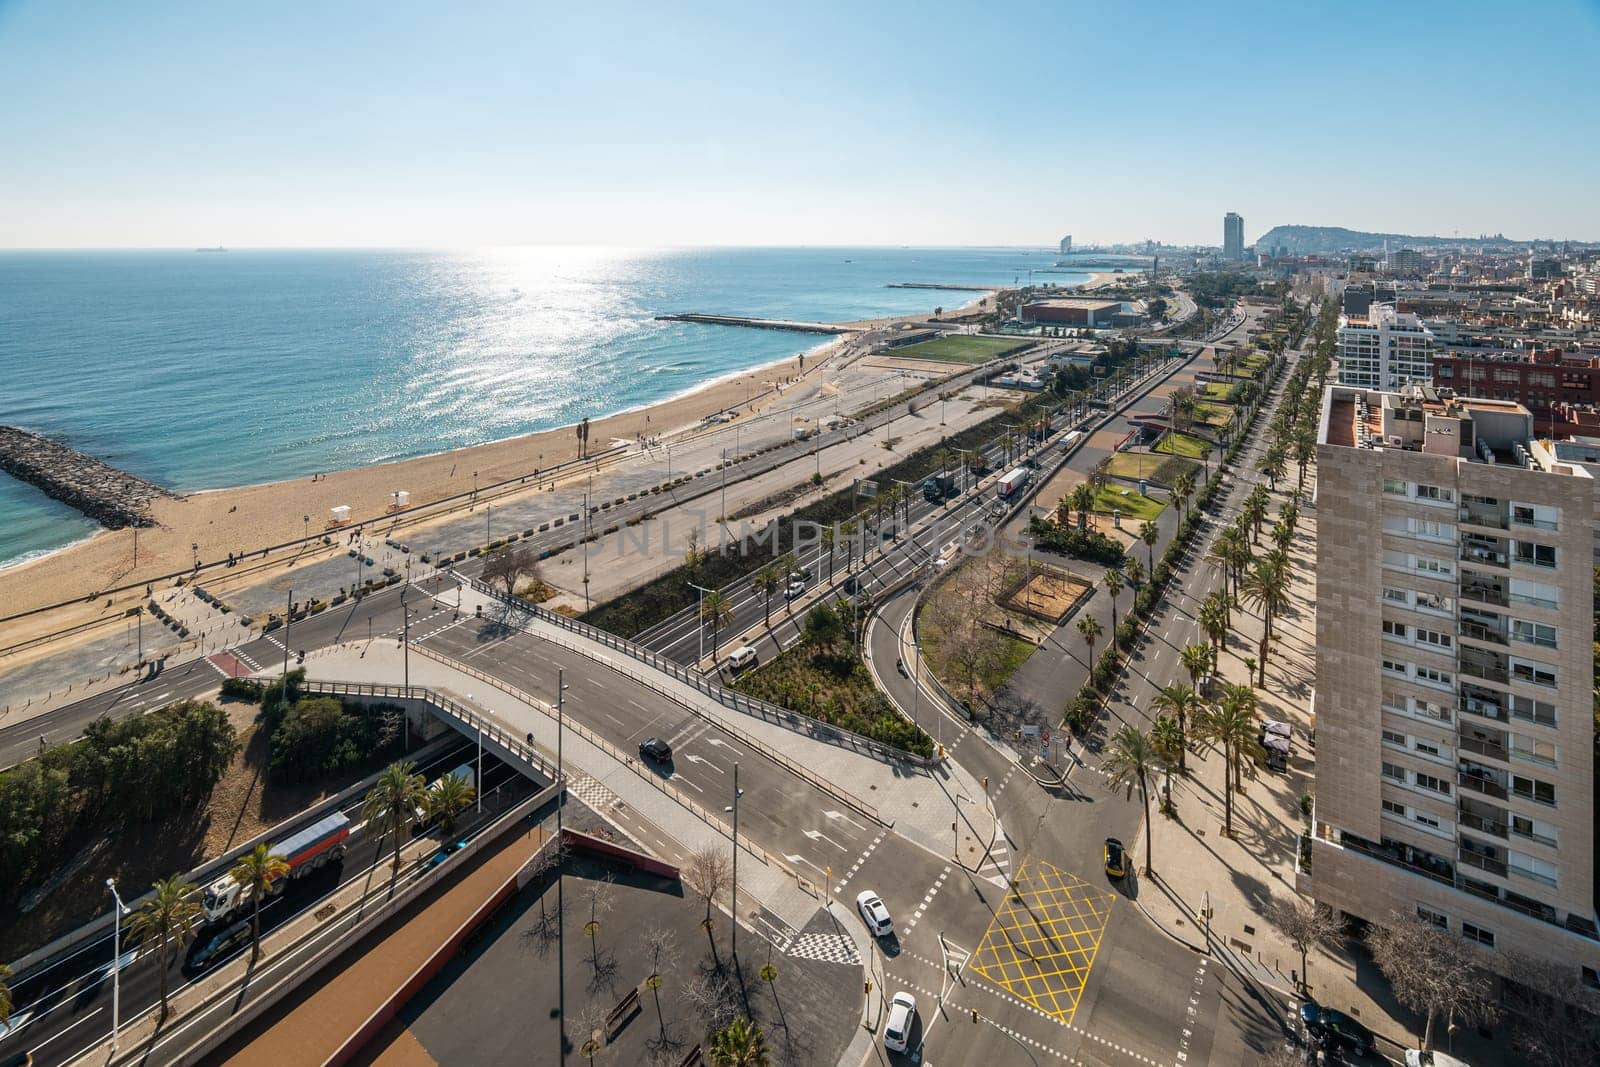 Urban interchange with overpass bridge in Diagonal Mar area in Barcelona. Blue sea and city infrastructure view from luxury apartment window